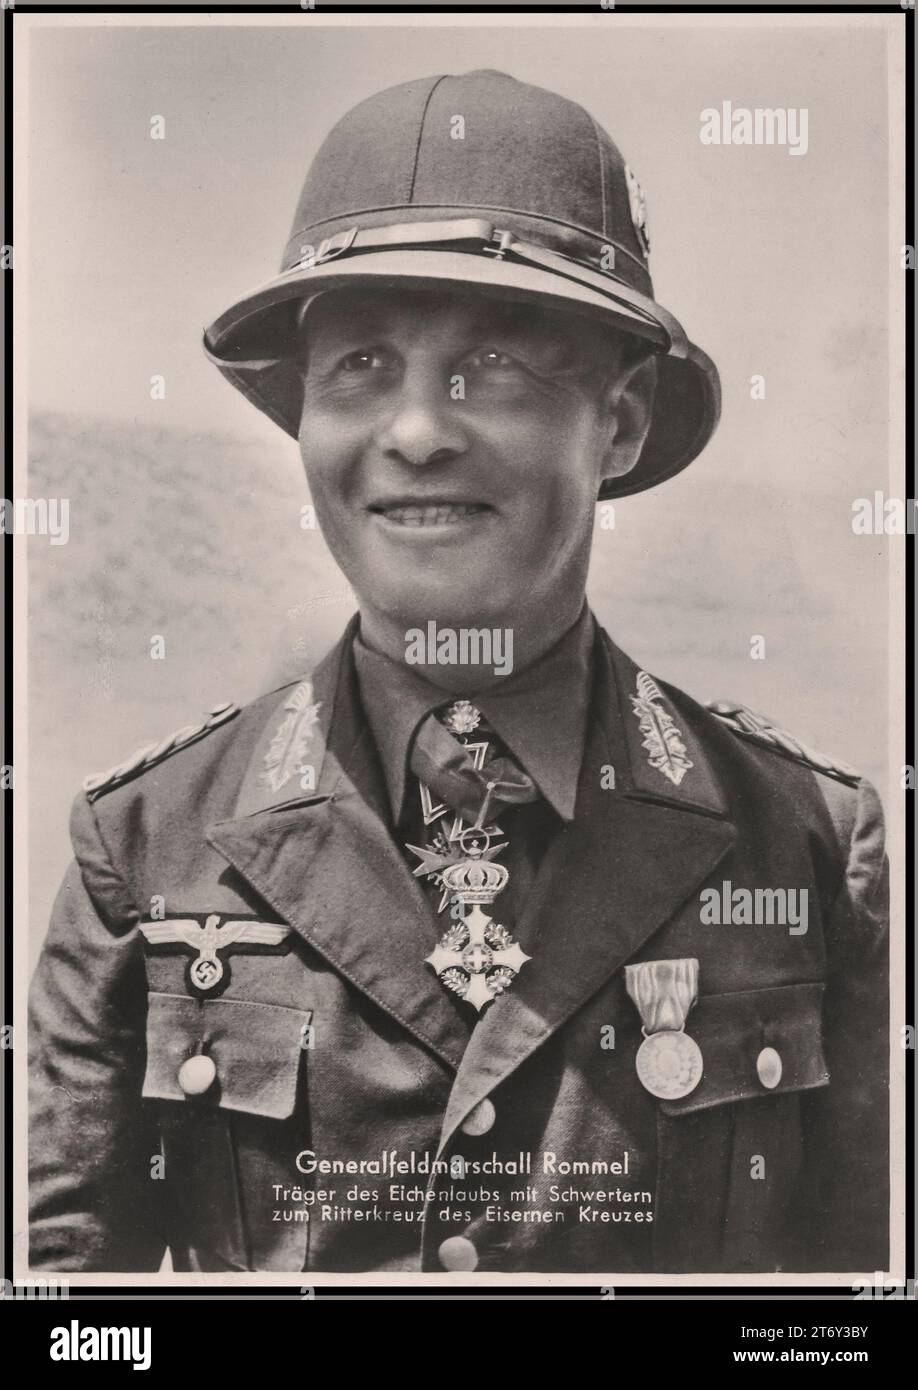 ROMMEL Field Marshal Erwin Rommel wearing his military uniform and tropical hat, 'Troppenhelm' a distinguished leading Nazi officer who was awarded the Knights Cross with swords and oak leaves. Nazi Germanys highest military honour. He was a brilliant military strategist in the North Africa campaign, where he was known as The Desert Fox. 1942 Stock Photo